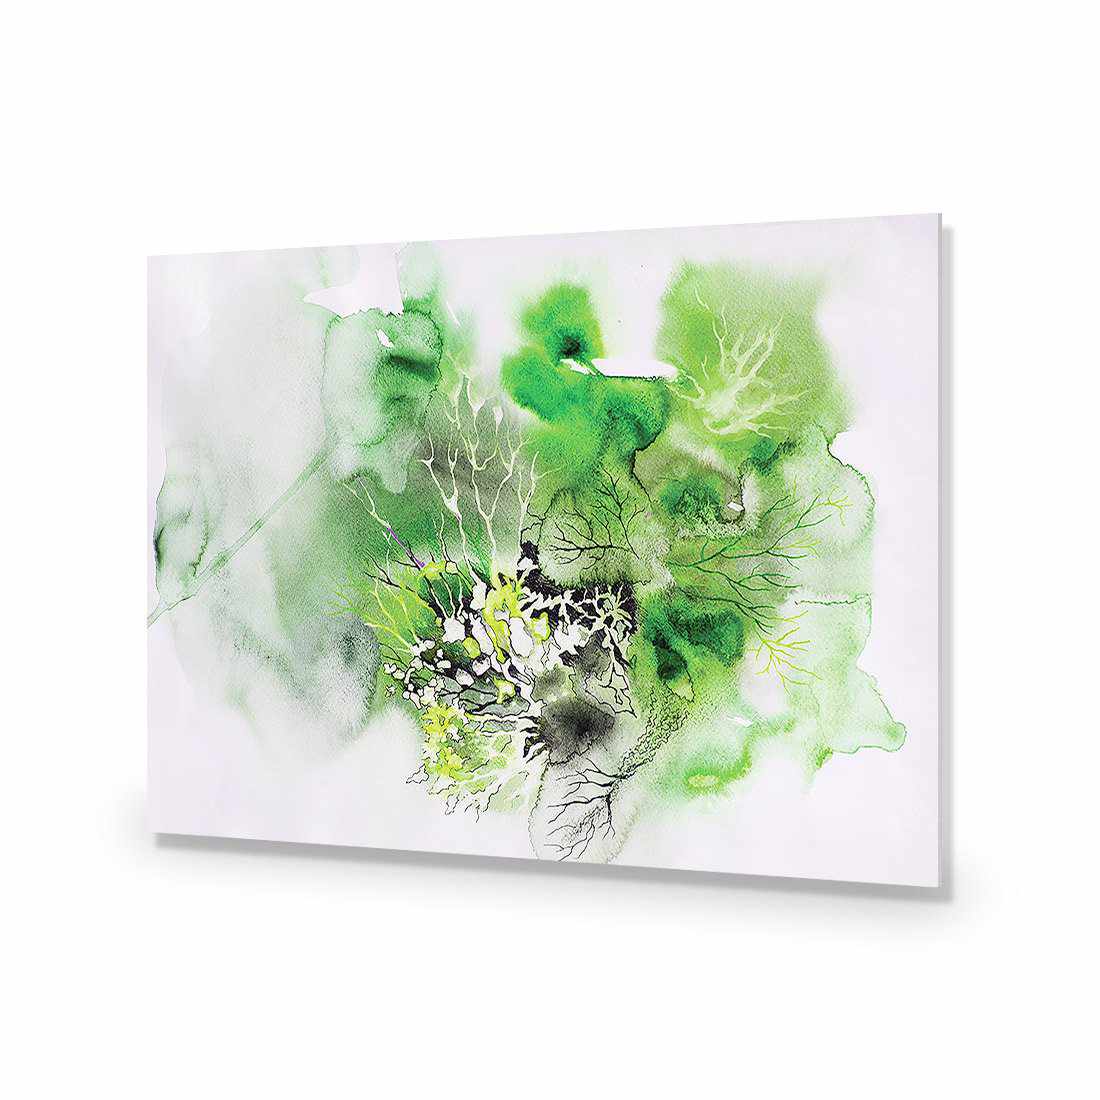 Veins Of Life, Green-Acrylic-Wall Art Design-Without Border-Acrylic - No Frame-45x30cm-Wall Art Designs